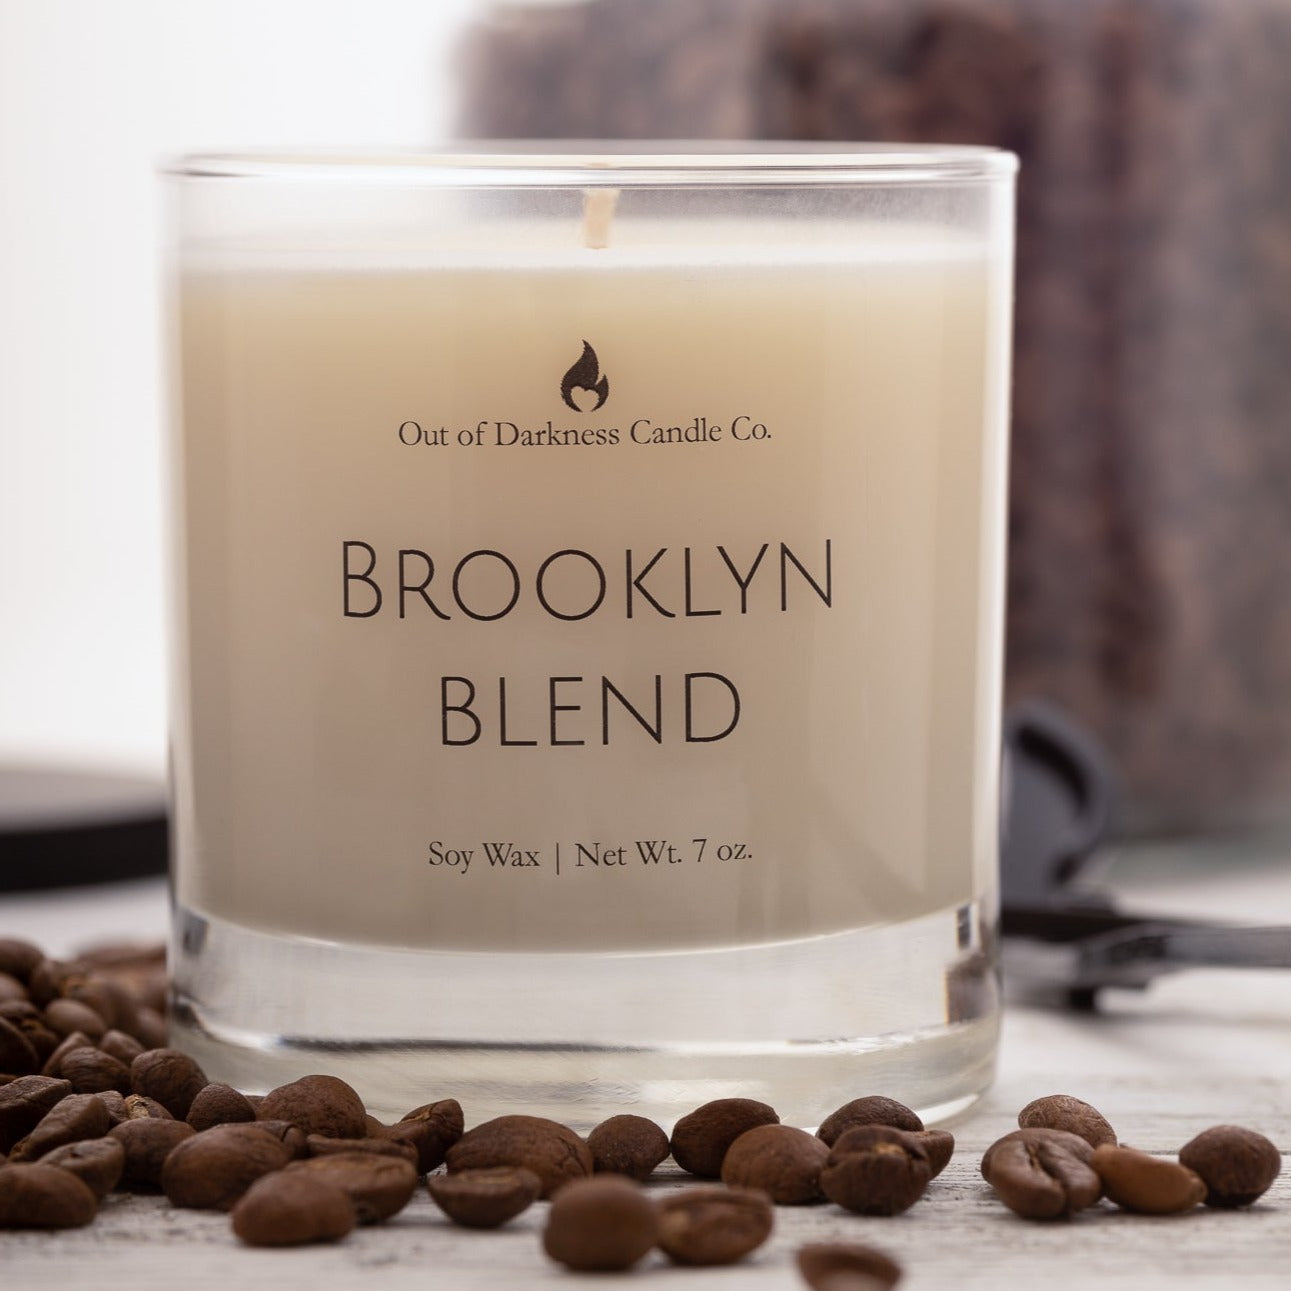 A glass jar candle that says Brooklyn Blend surrounded by coffee Beans